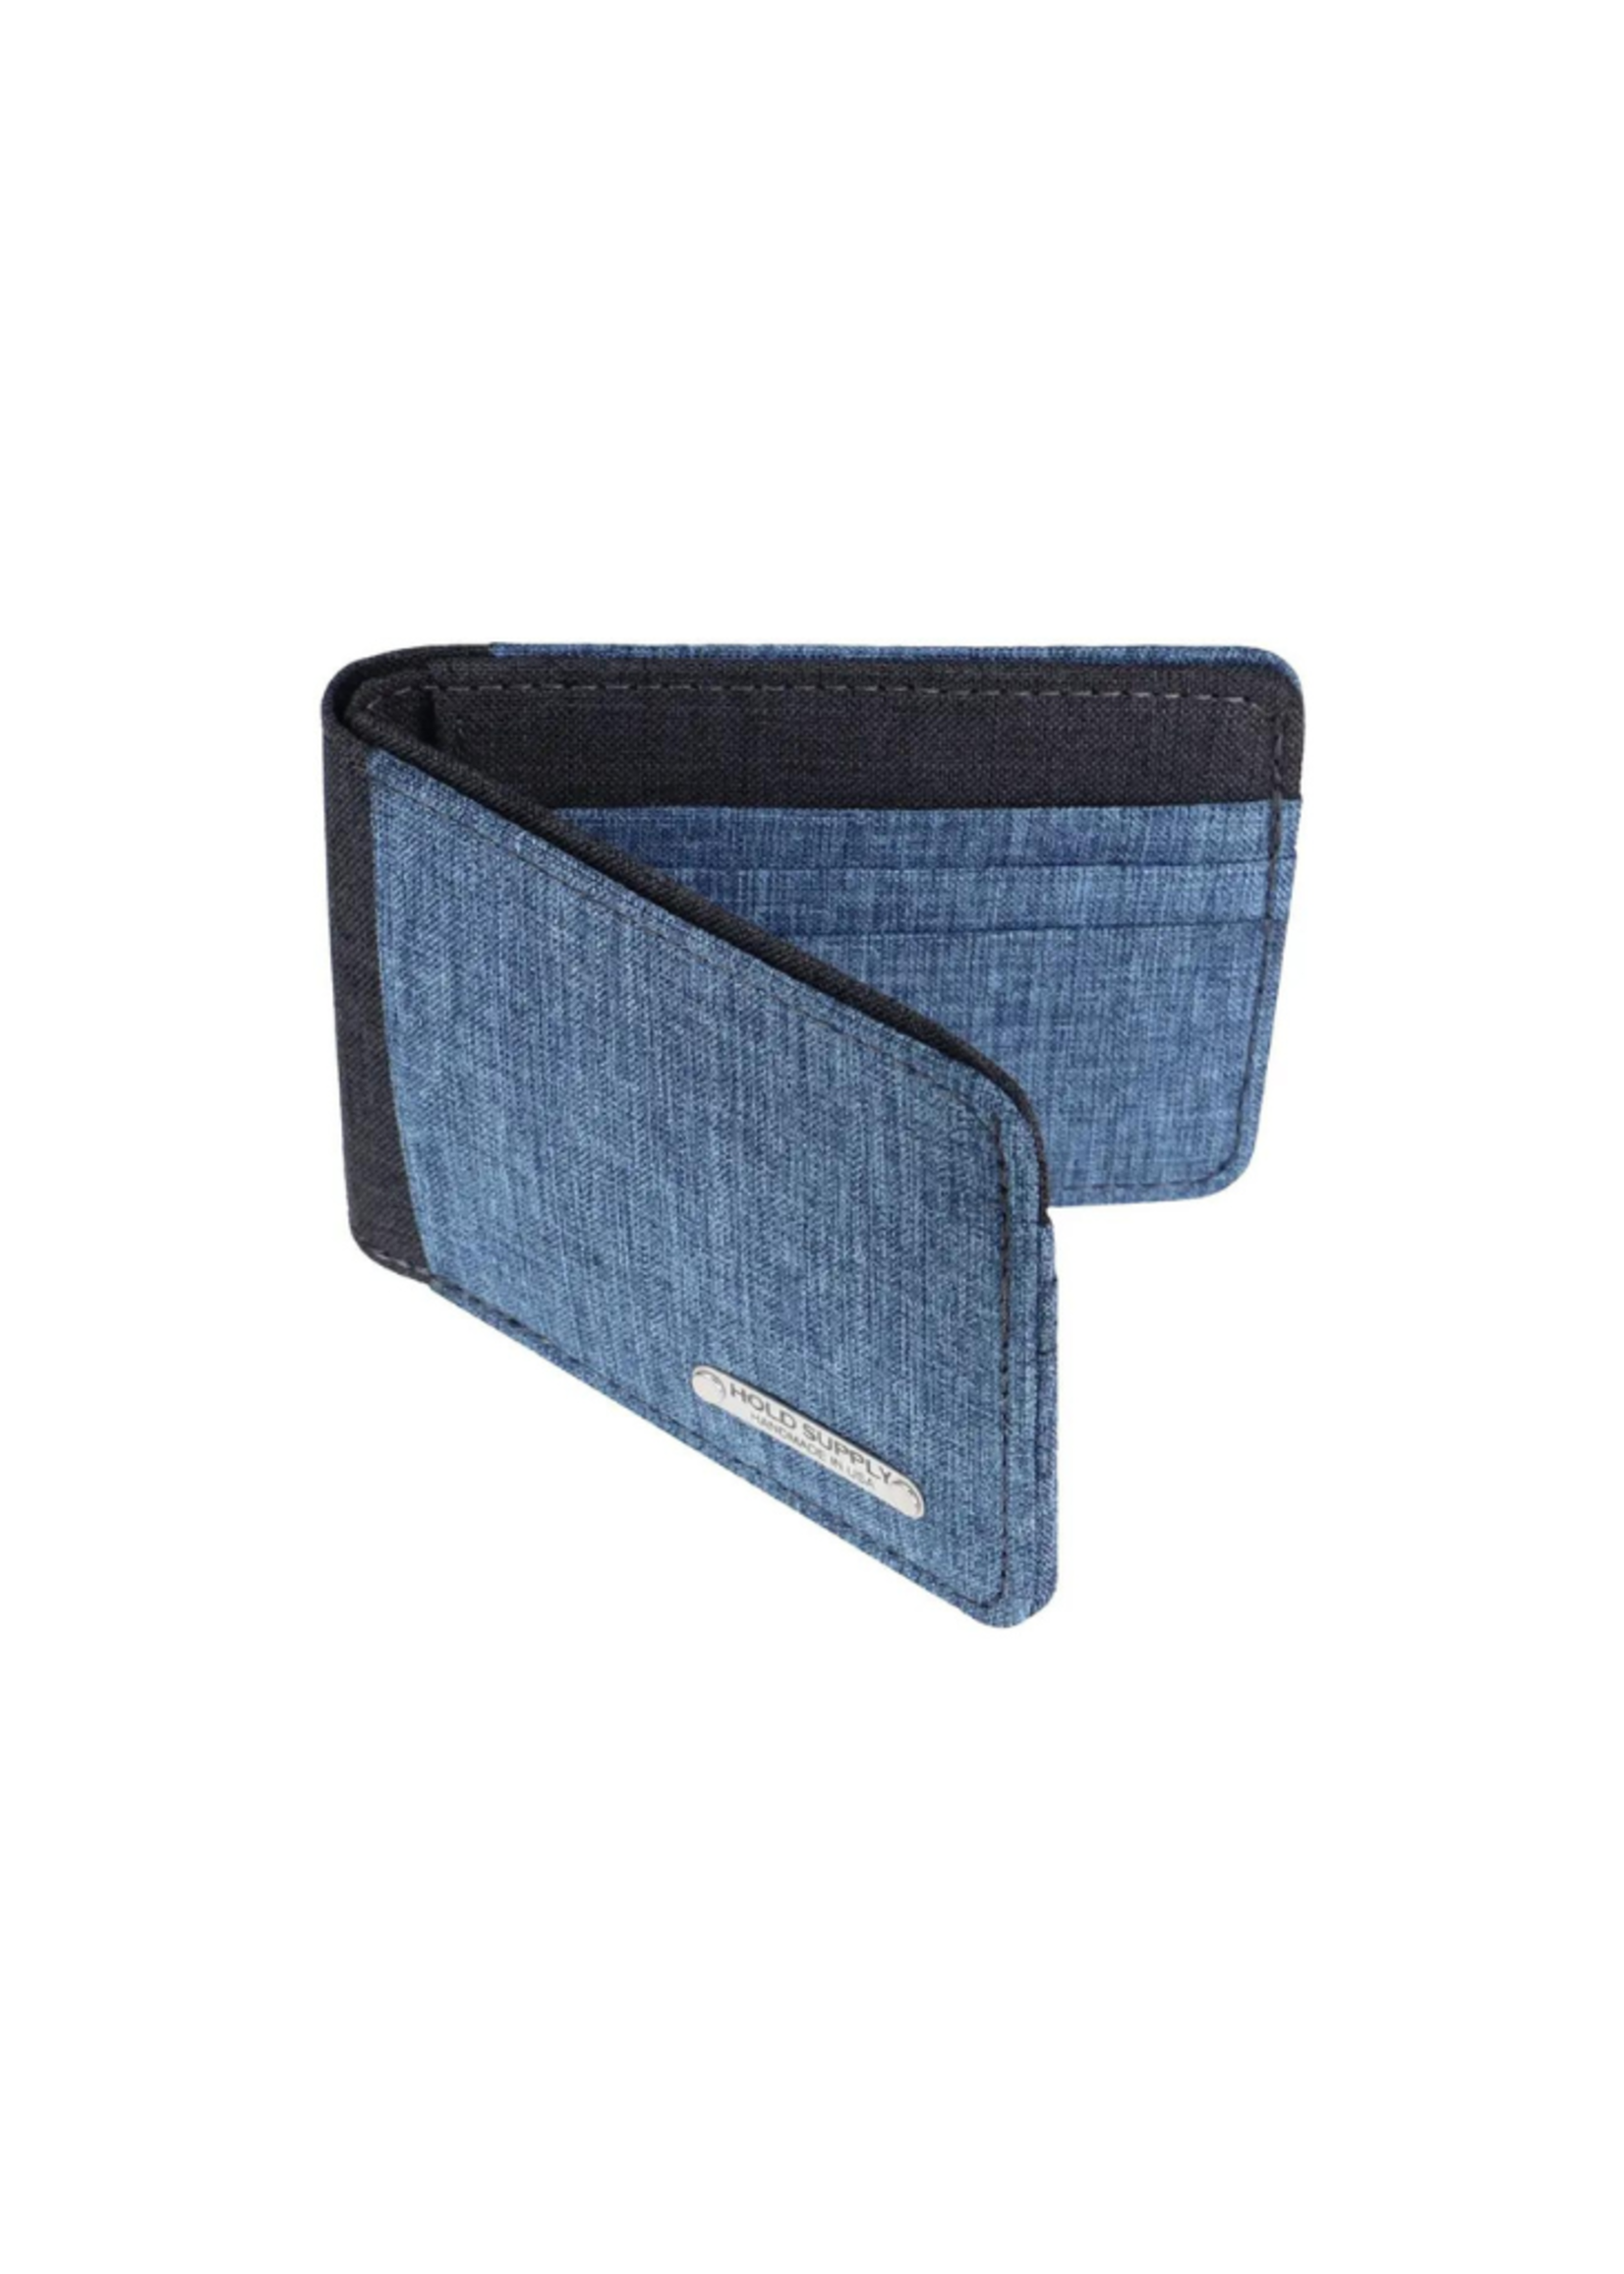 Hold Supply Co Blue / Gray Fabric Bifold Wallet